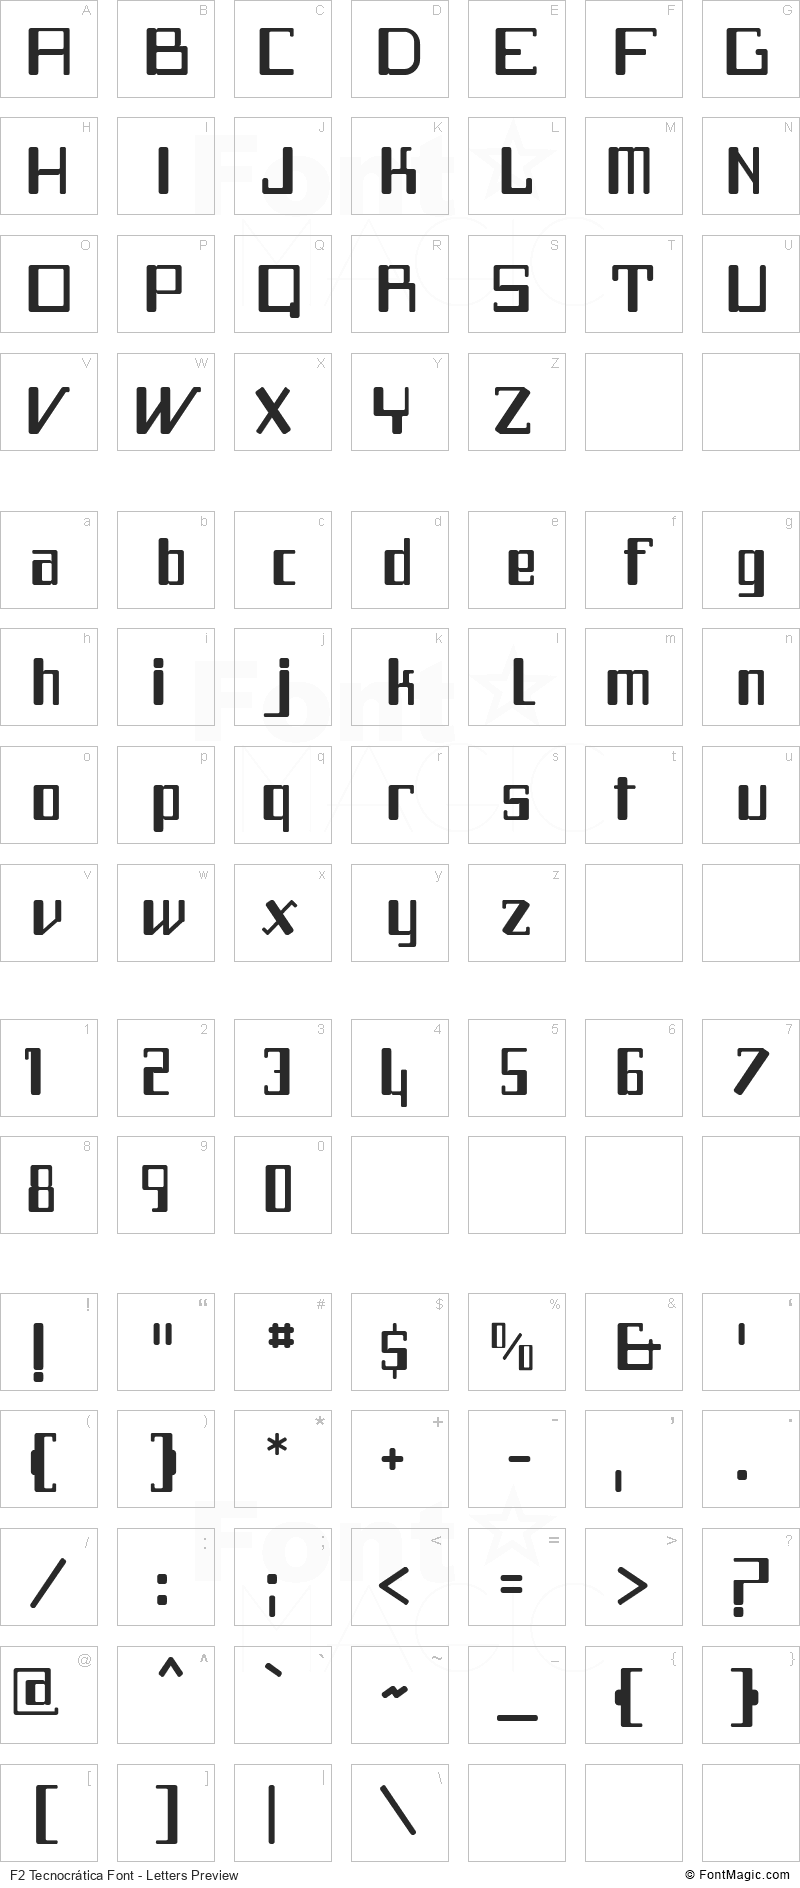 F2 Tecnocrática Font - All Latters Preview Chart